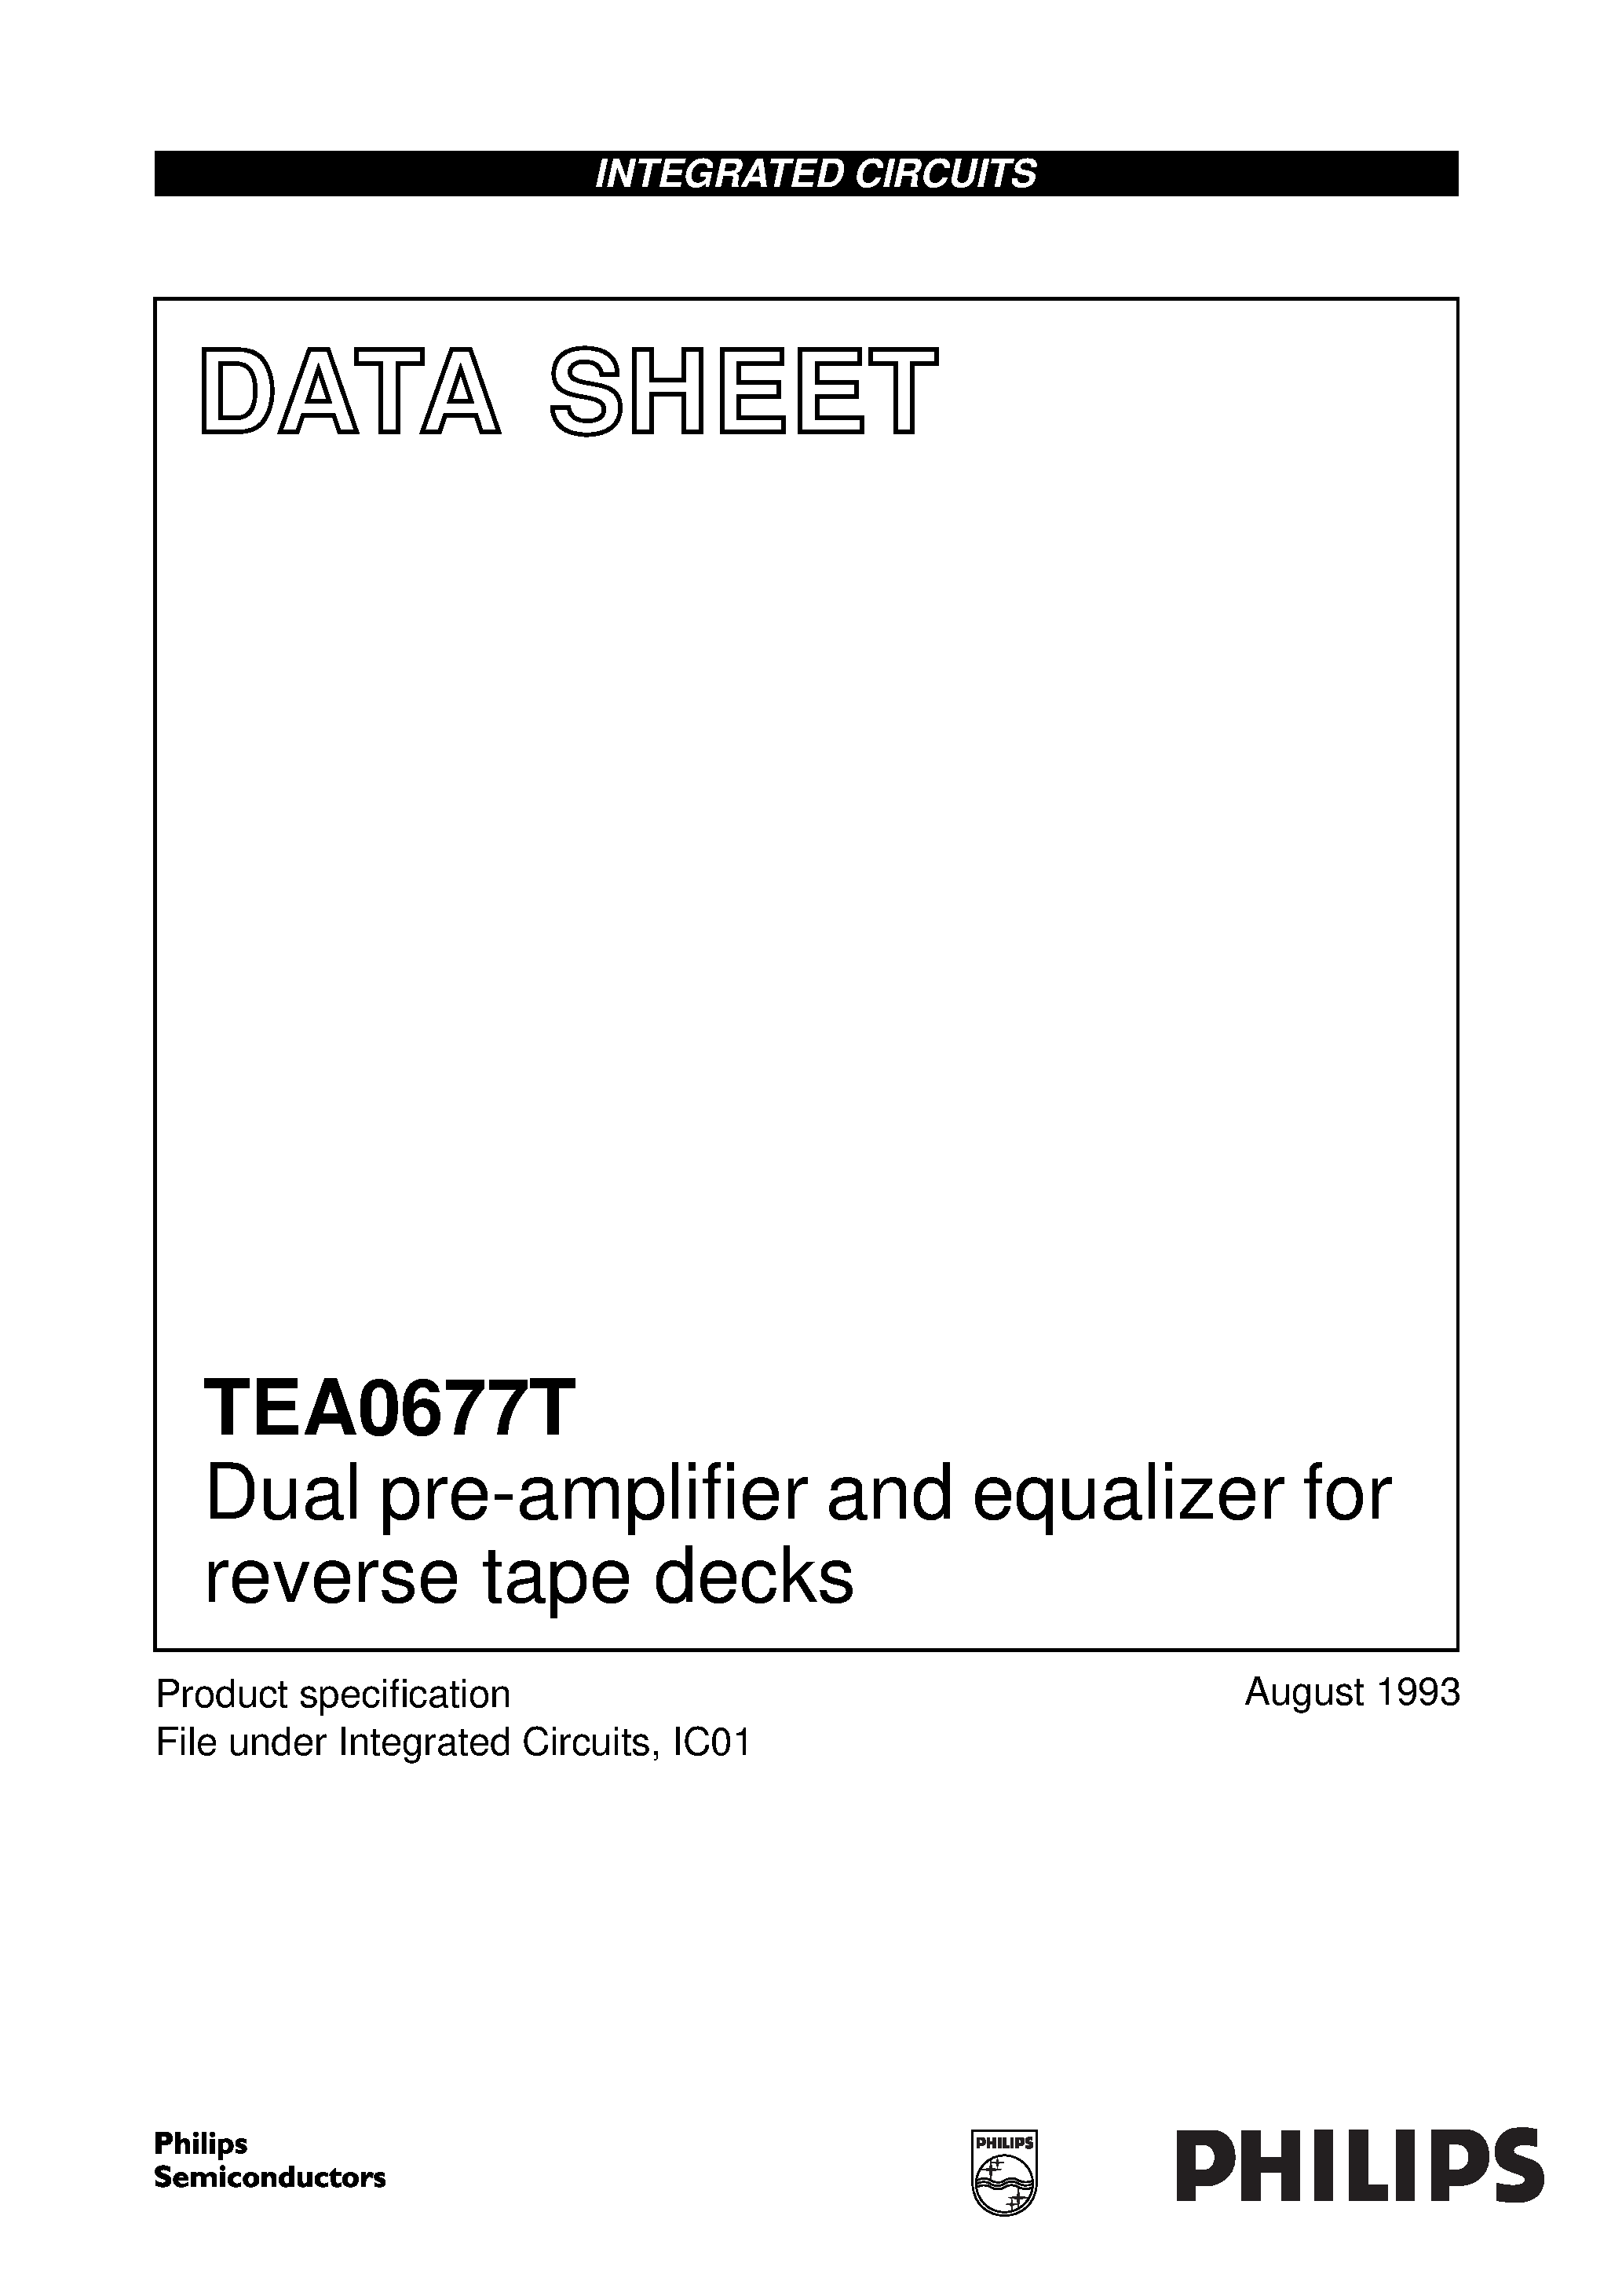 Datasheet TEA0677 - Dual pre-amplifier and equalizer for reverse tape decks page 1